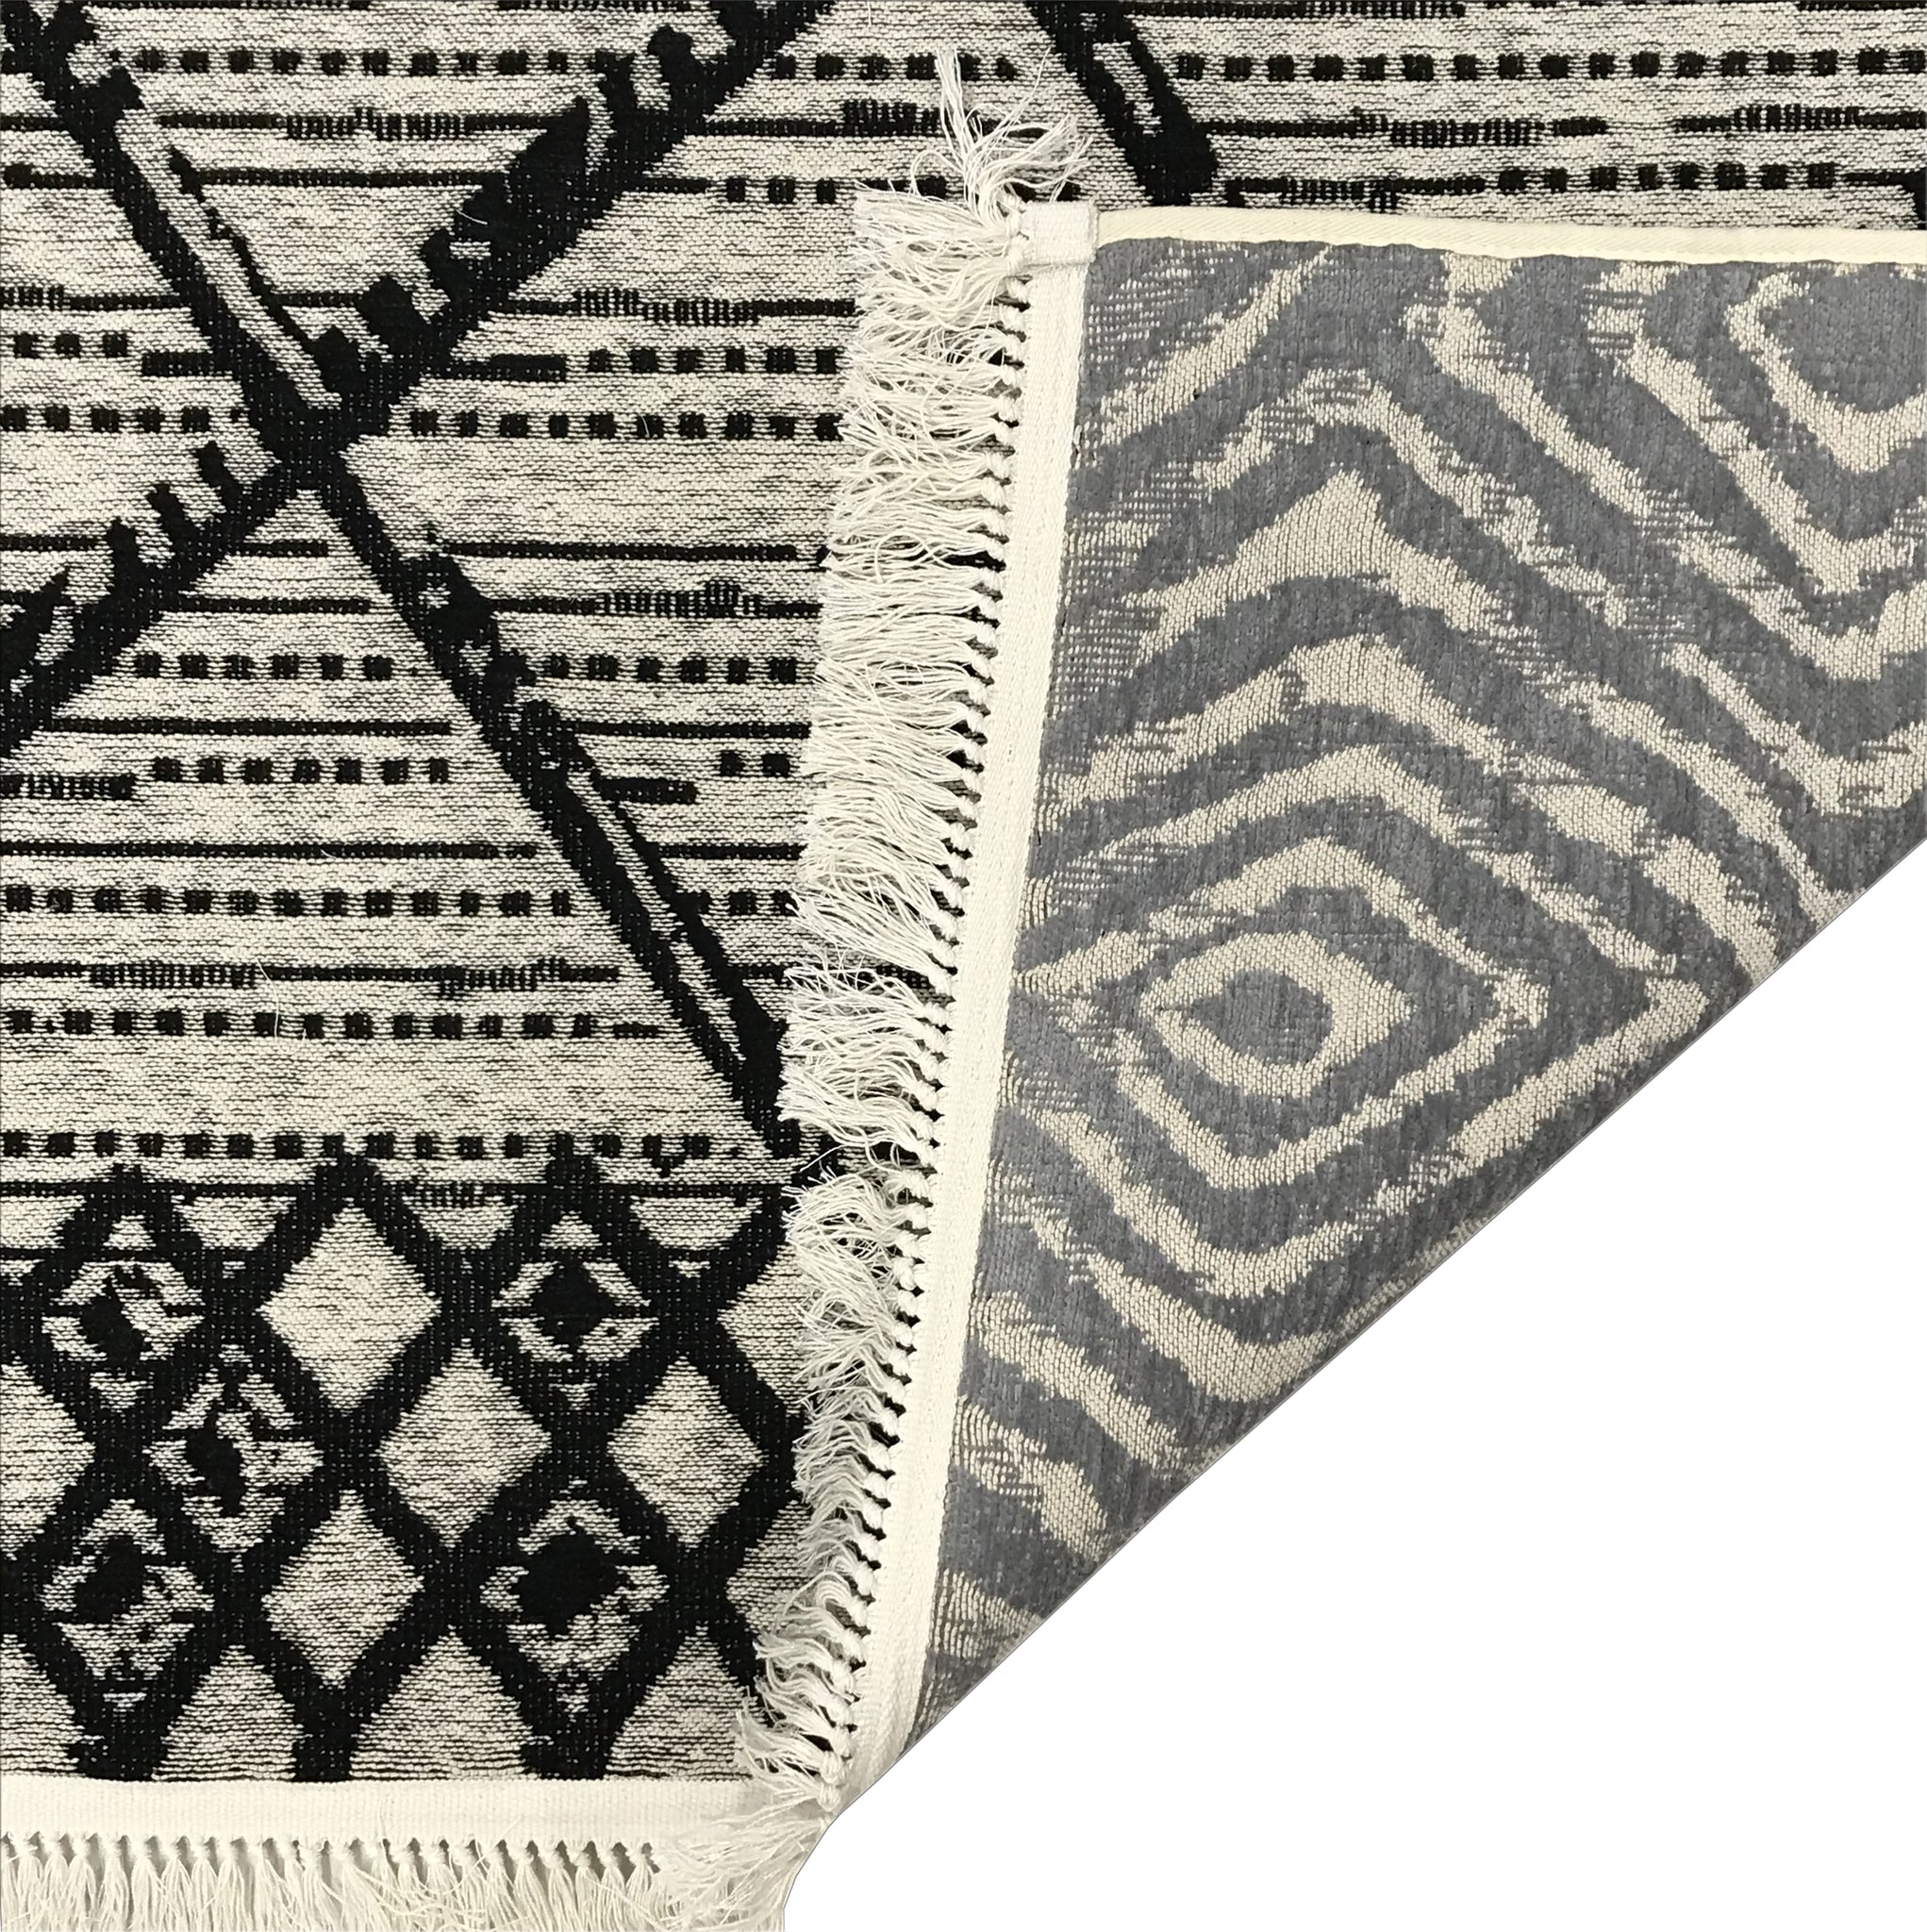 Washable Area rug | Simon & Yildirim Reversible Simple | Black & White with Reversible Gray & White Close-up Detail | 9x11 | By MotherRuggers.com | Machine Washable | Jacquard Woven | Uniquely Reversible | Pet Friendly | Kid Friendly | Machine Wash | Line Dry | Living Room | Covered Patio | Entry Way | Bedroom | High-Traffic | Three-year warranty with proper care | Shake or light Vacuum | Machine Wash as needed | Dry Flat or Line Dry | Dries fast